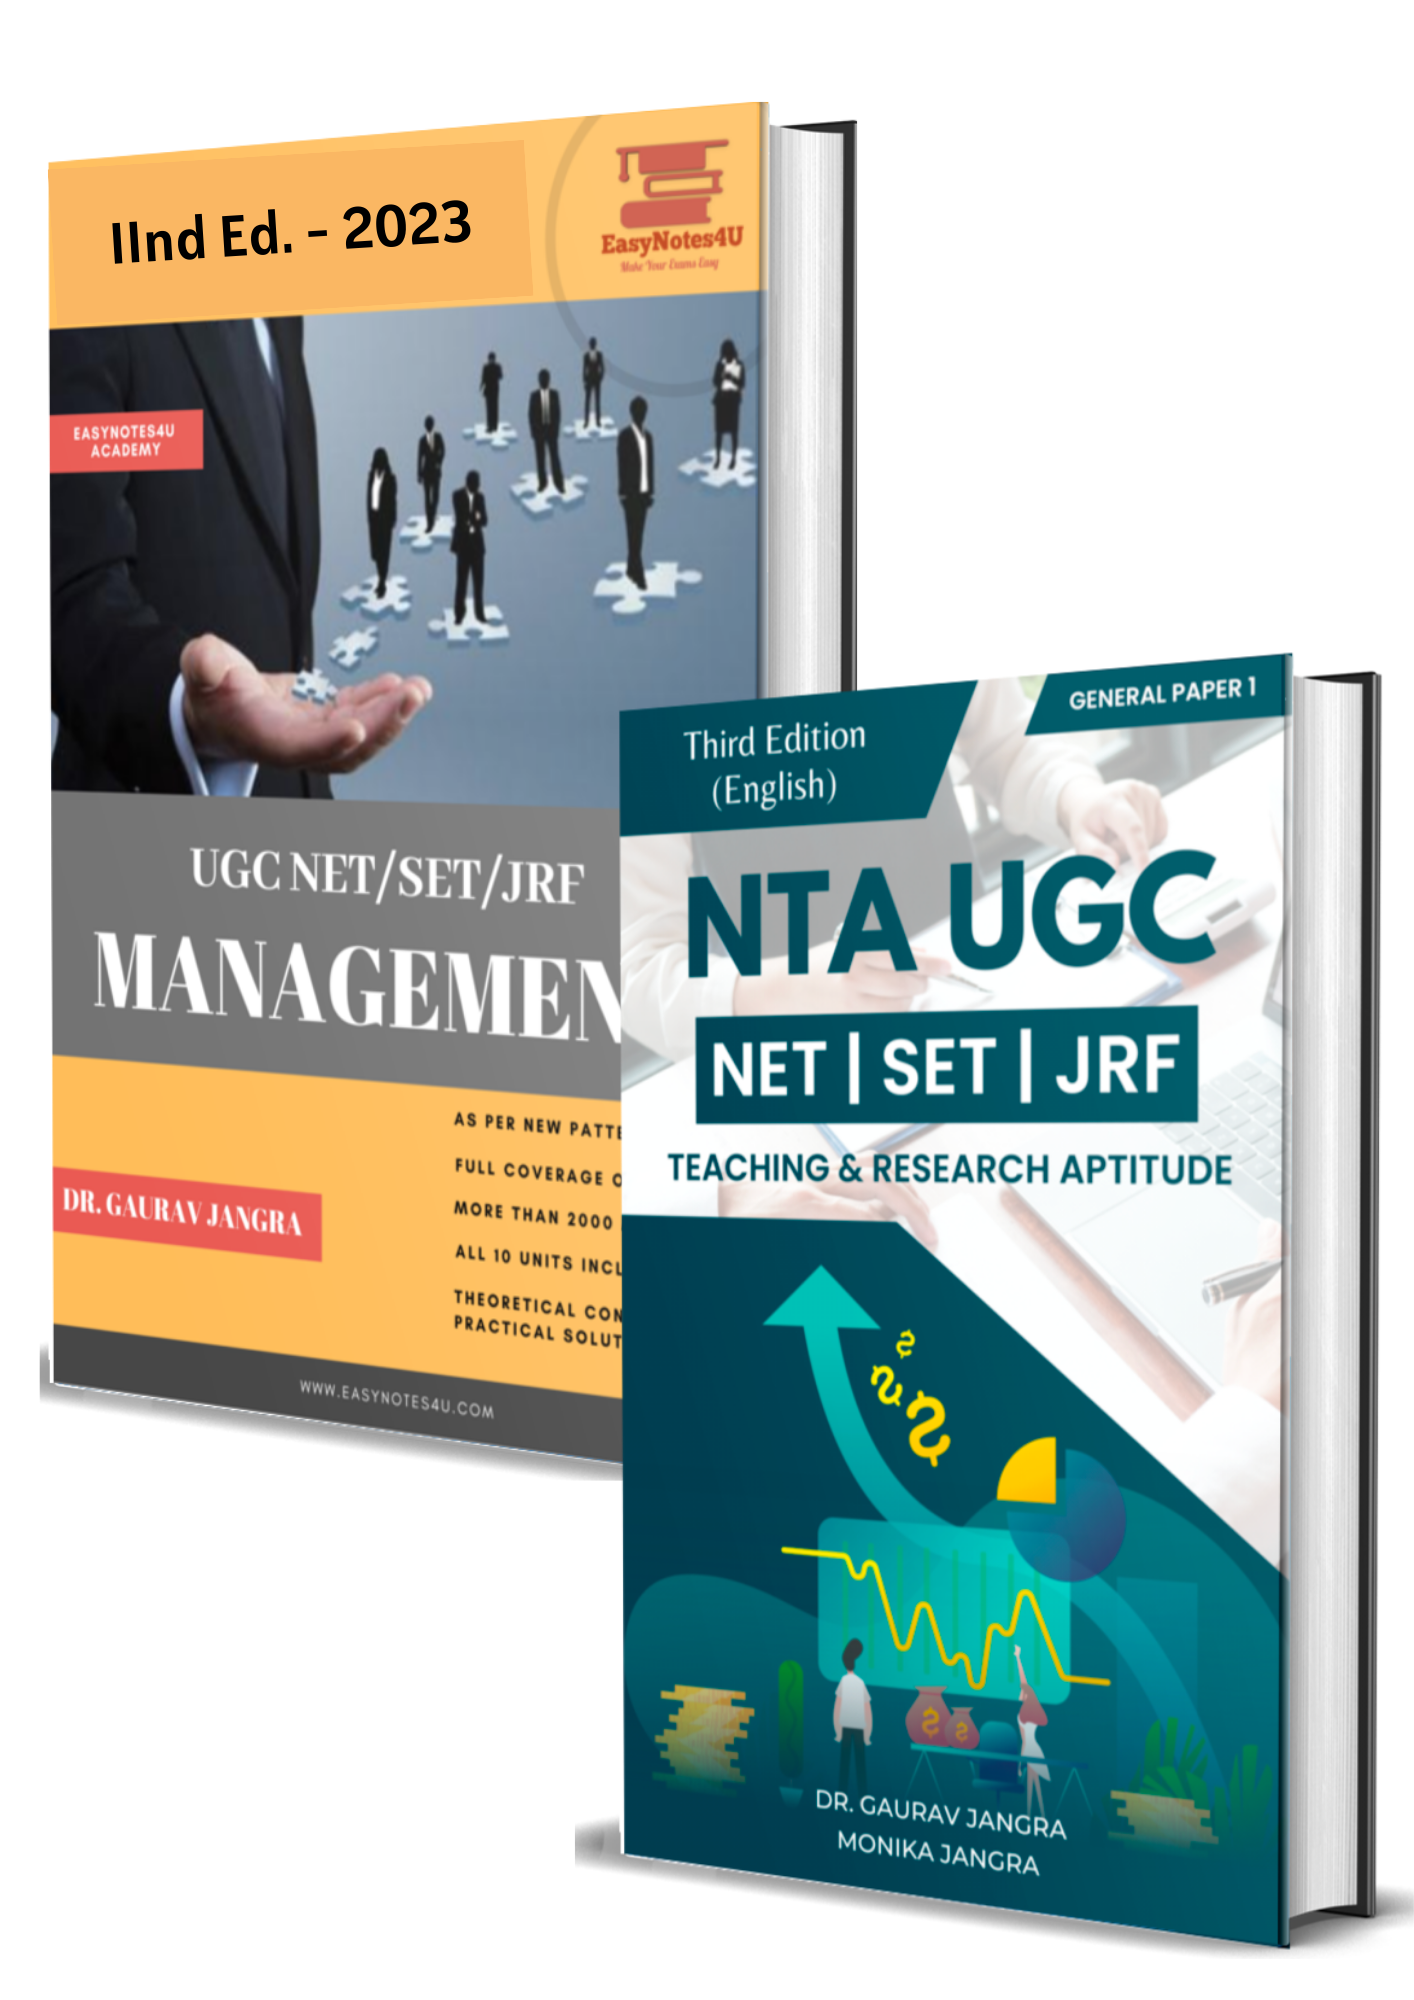 Easy Notes 4U Online Study Material UGC NET PDF Notes eBooks Books Paper 1 2 commerce Management Academy